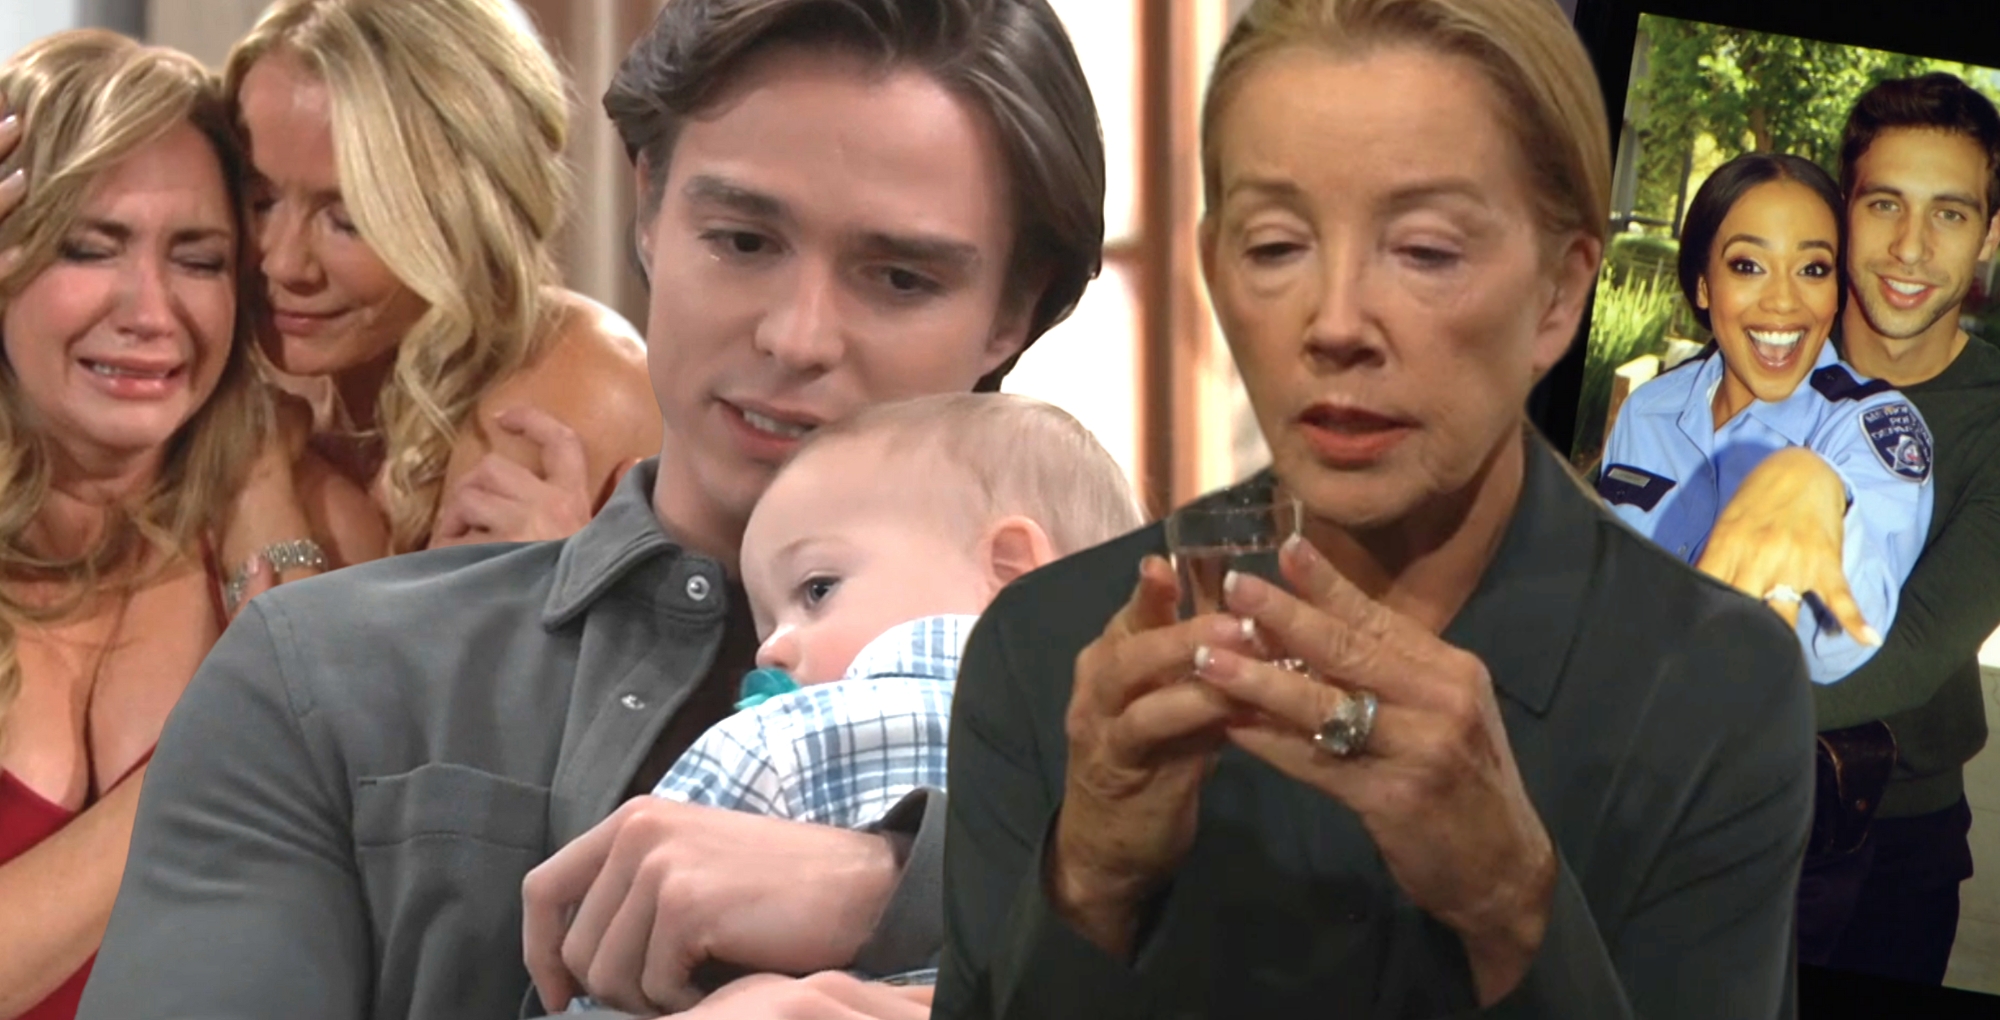 best twist and worst reaction (and more!) in photos this week in soap operas.